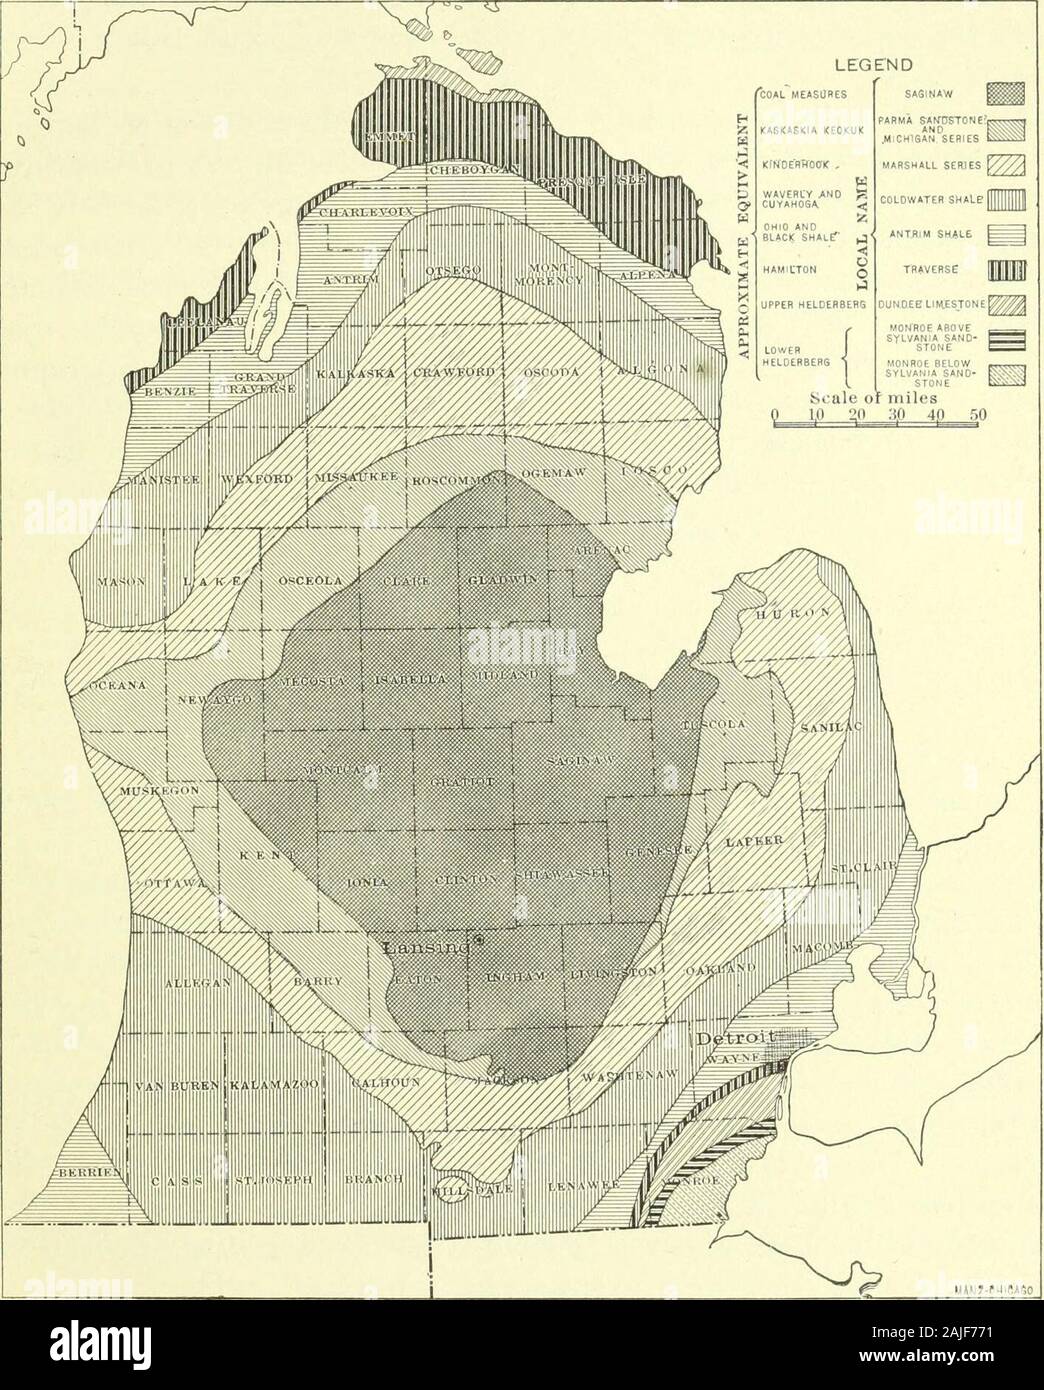 Water Supply and Irrigation Papers of the United States Geological Survey . fromwest to east. UNDERGROUND WATER SUPPLIES. SUPPLIES OF THE DRIFT. Eastern shore district.—This district embraces the eastward-slopingstrip lying between the moraines and the shores of Lakes Huron, St.Clair, and Erie, from Saginaw Bay to the southern limits of the State. The surface deposits of the region, except in some of the valleys a Compiled mainly from report by A. C.Lane on Water Resources of the Lower Peninsula of Michi-gan, Water-Supply and Irrigation Paper U. S. Geol. Survey No. 30, 1899. For facts relating Stock Photo